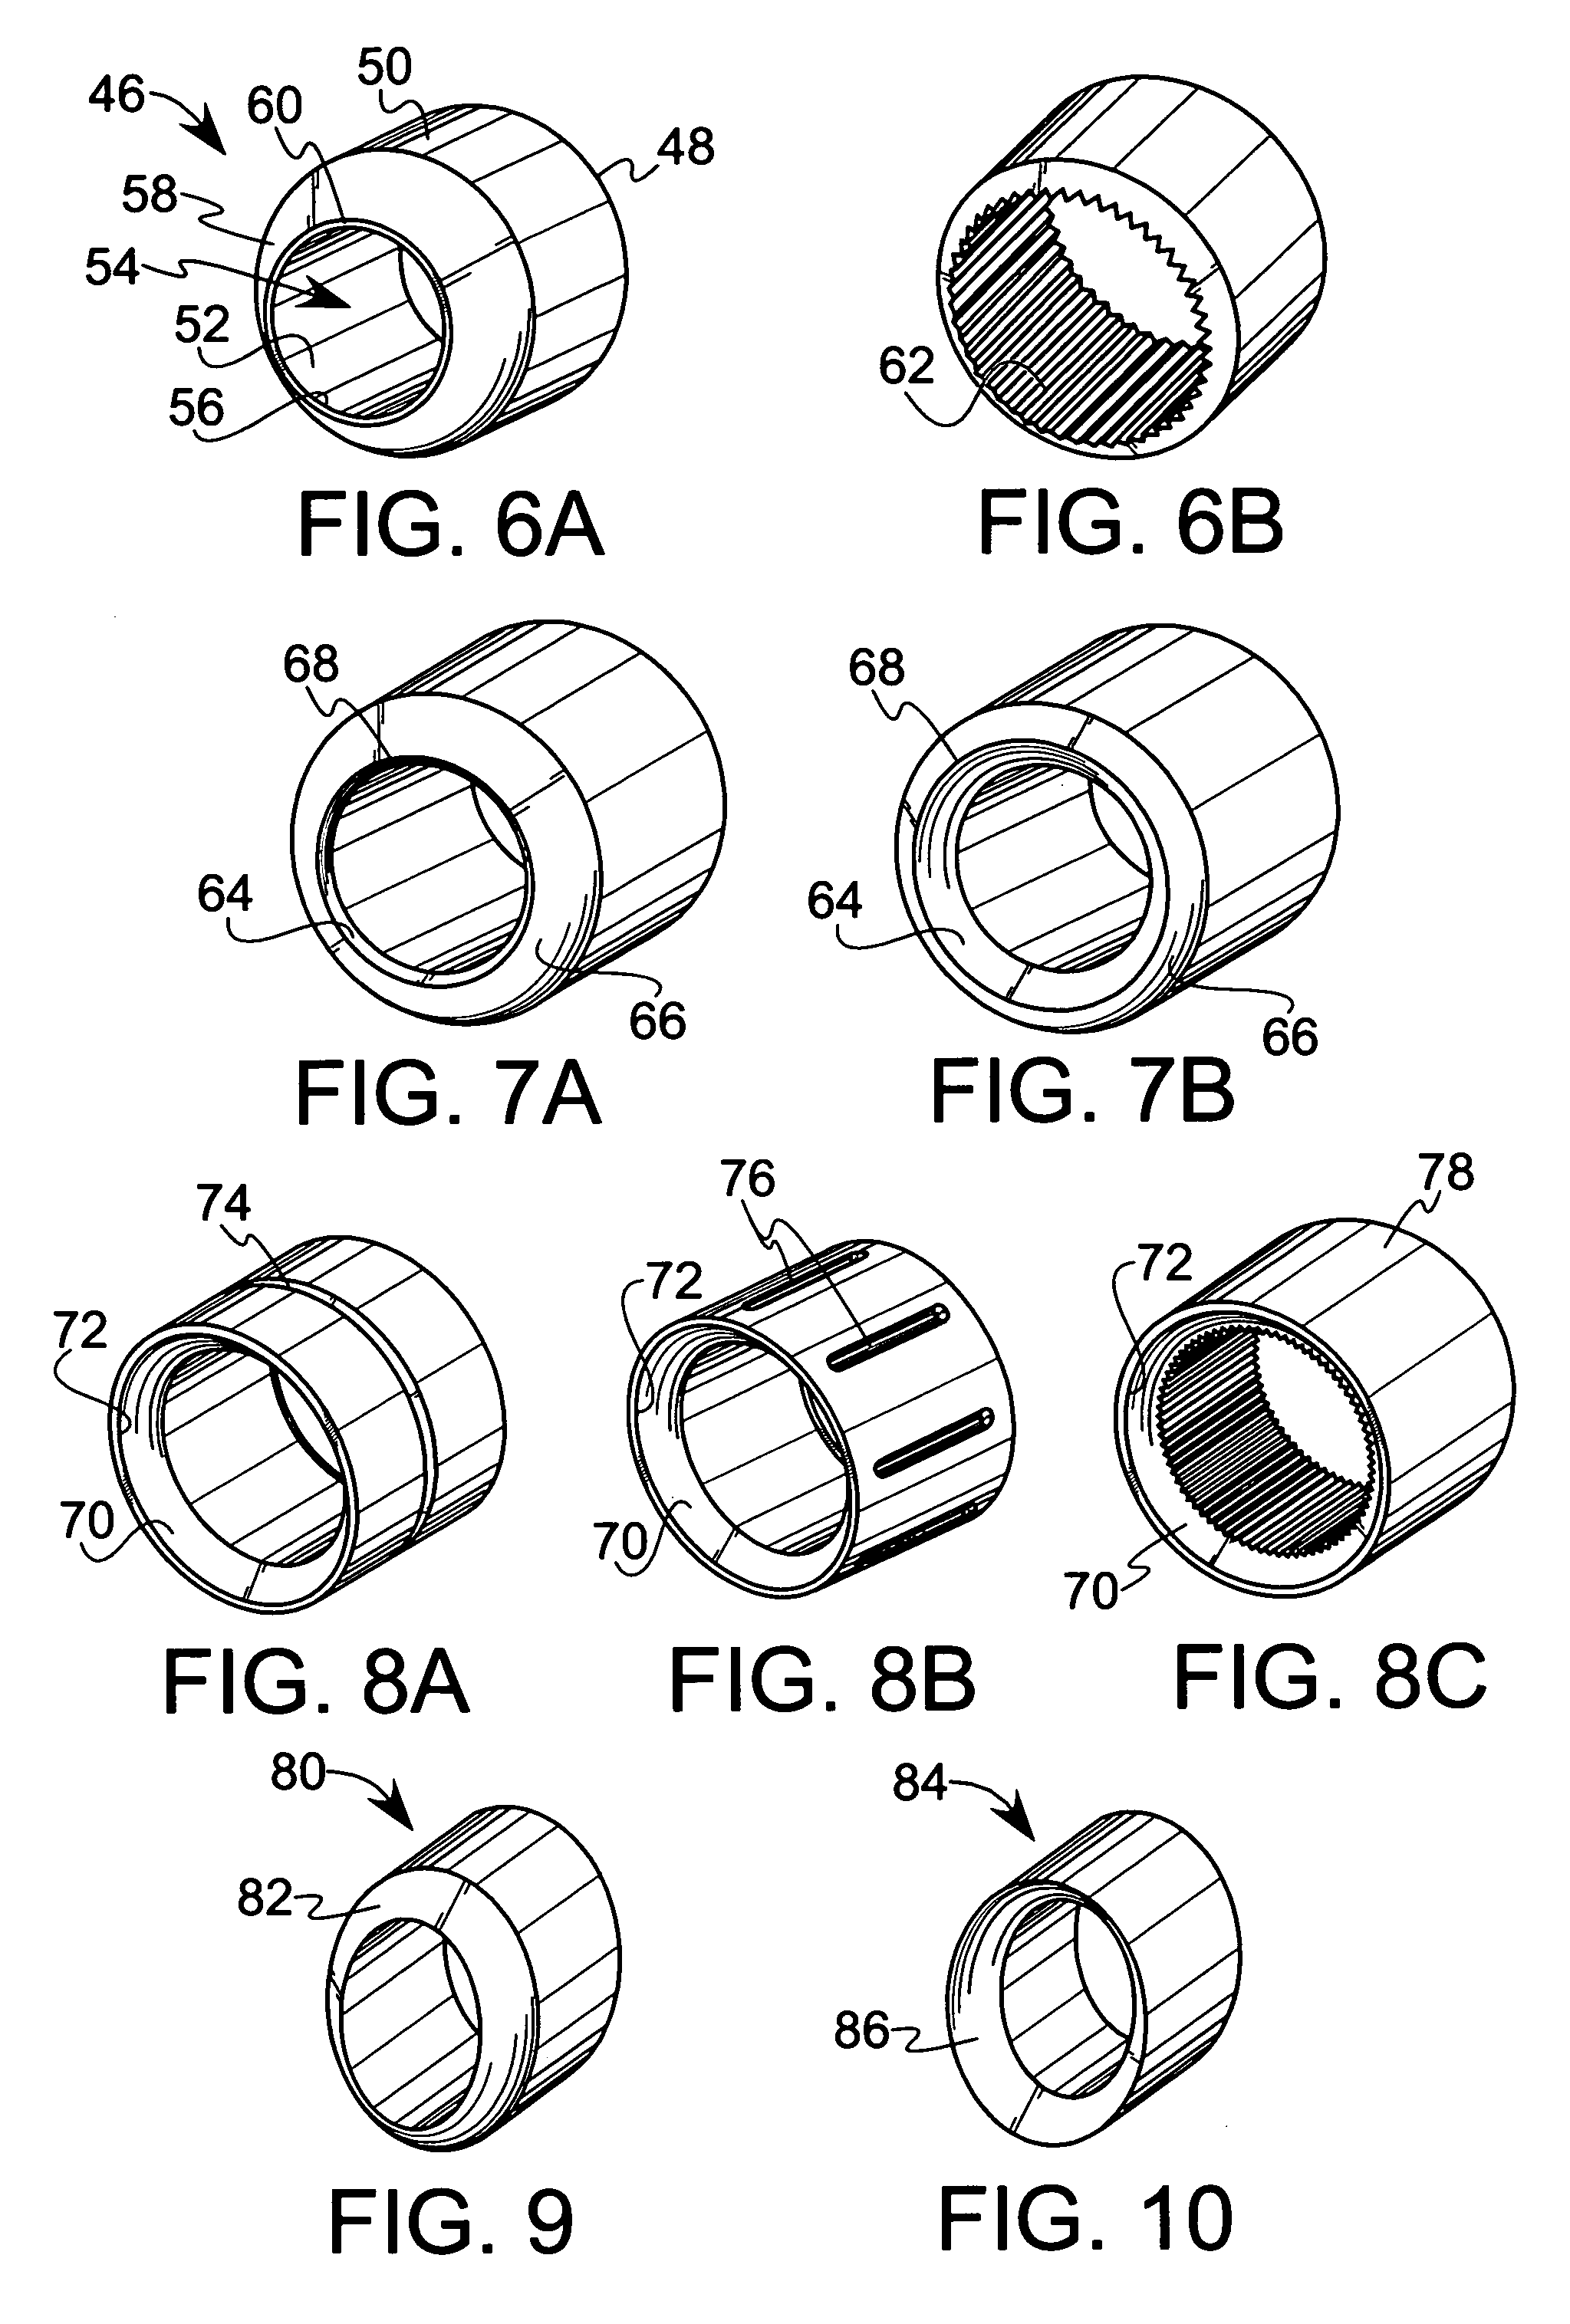 Tool body and cutting insert for metal cutting operations